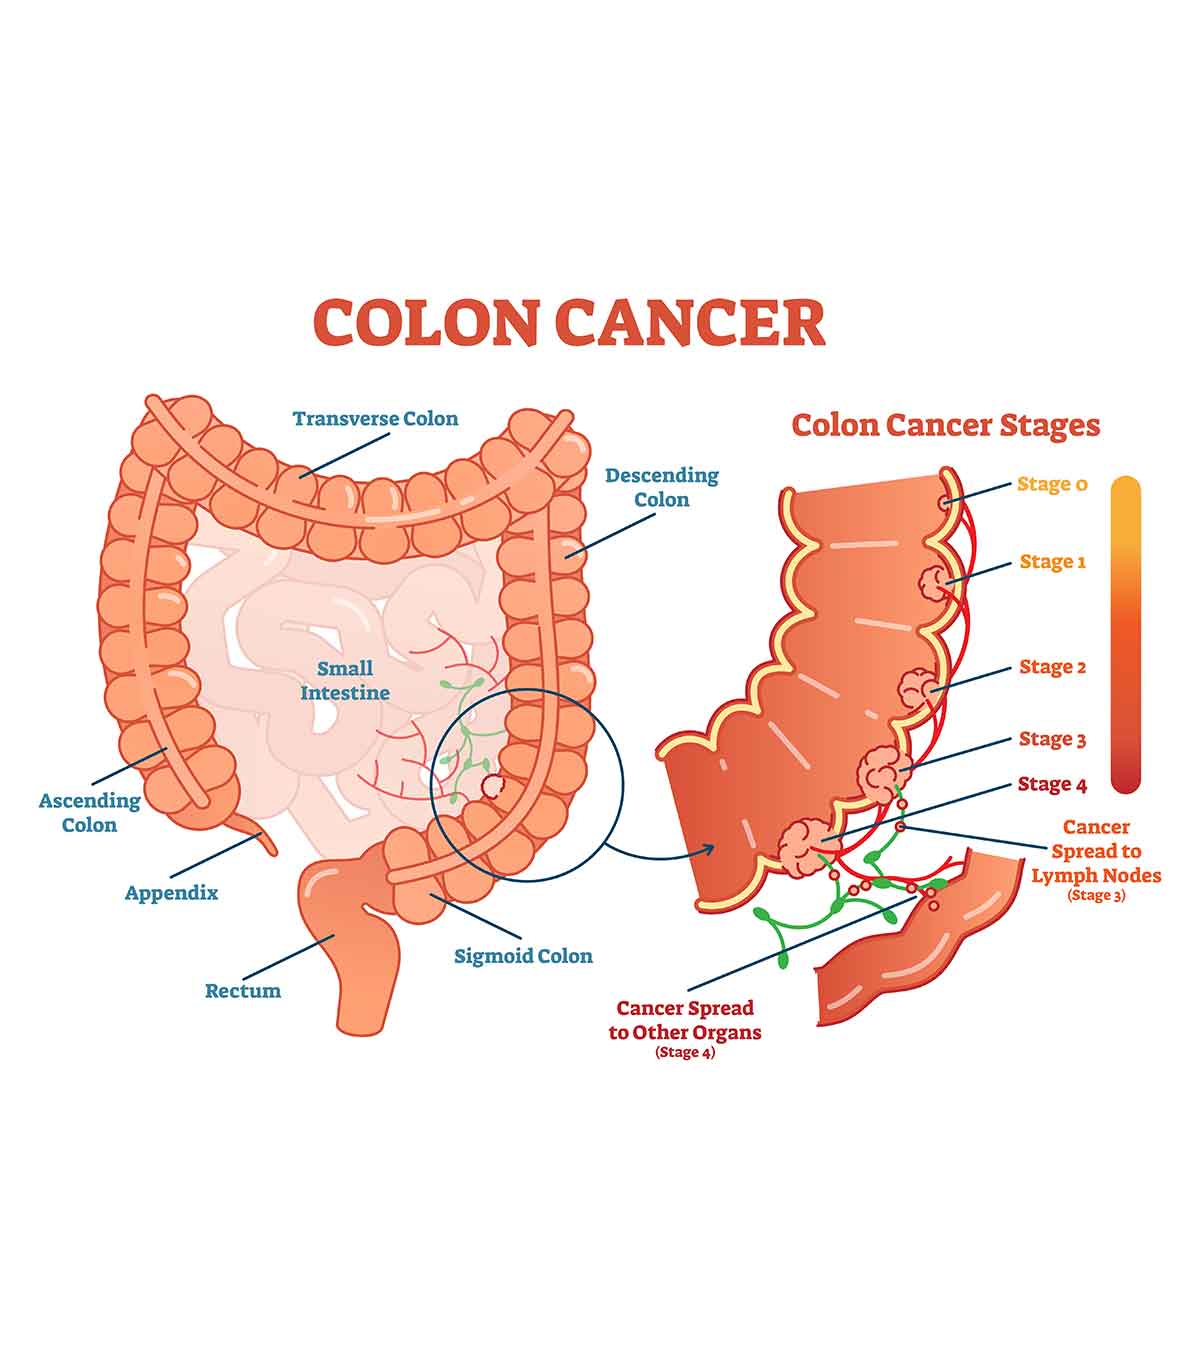 Colon Cancer In Teens: Symptoms, Causes, Treatment And Risk Factors